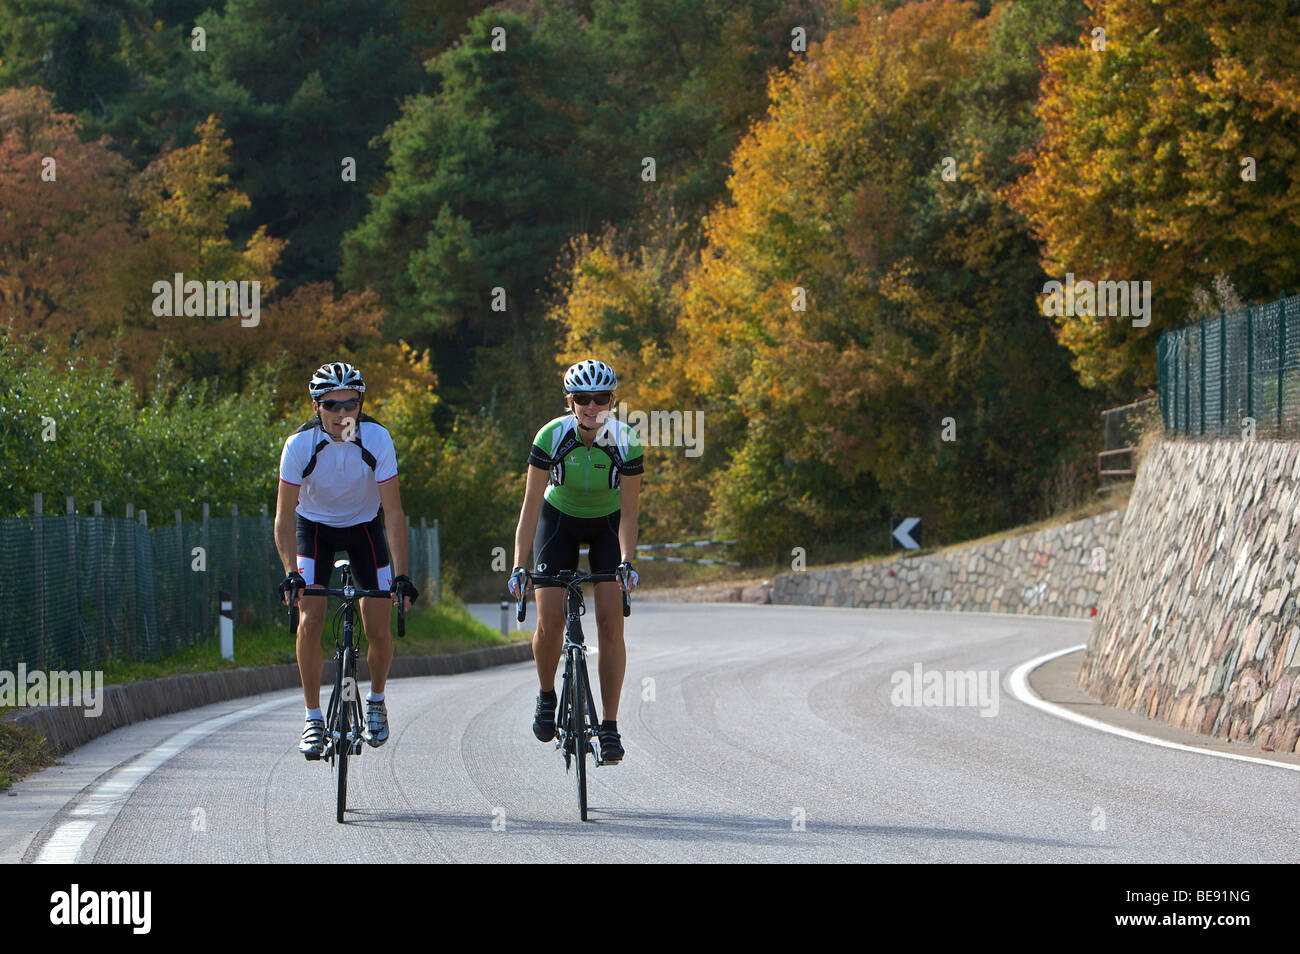 Bicycle racers at the Mendel Pass above Caldaro, South Tyrol, Italy, Europe Stock Photo